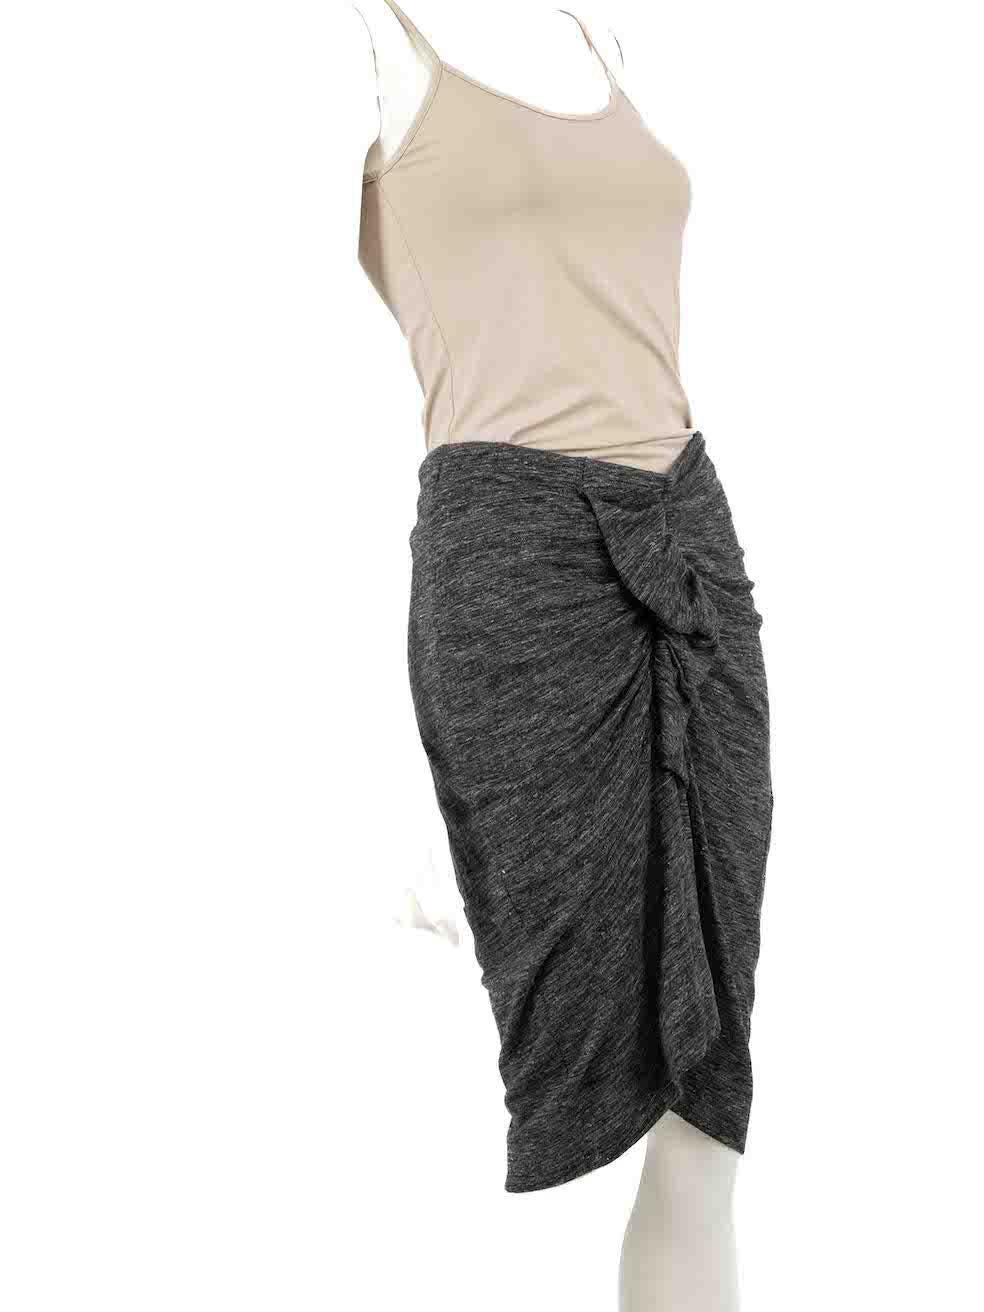 CONDITION is Very good. Hardly any visible wear to skirt is evident on this used Isabel Marant Etoile designer resale item.
 
 
 
 Details
 
 
 Grey
 
 Synthetic
 
 Mini skirt
 
 Fitted and stretchy
 
 Marl pattern
 
 Ruched accent on centre front
